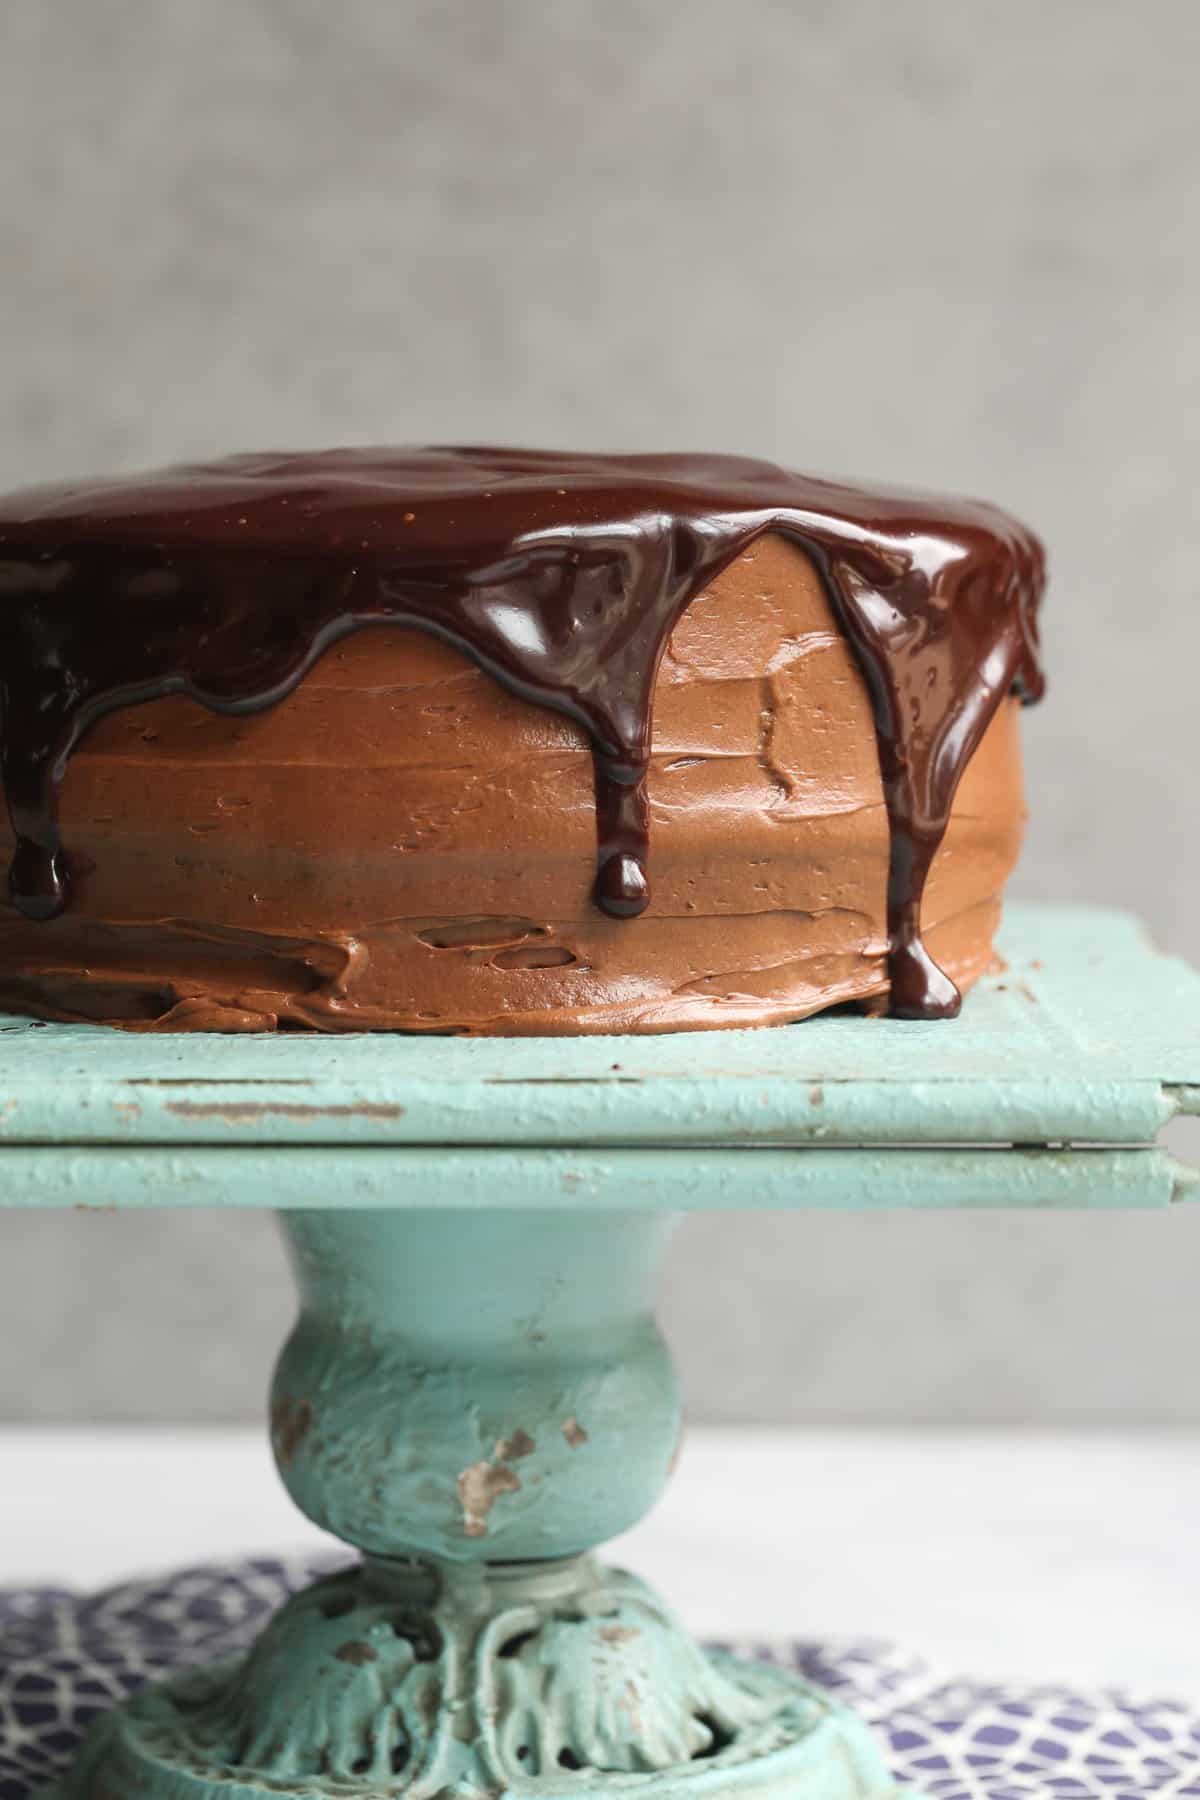 Perfect Chocolate Cake topped with chocolate frosting and chocolate ganache